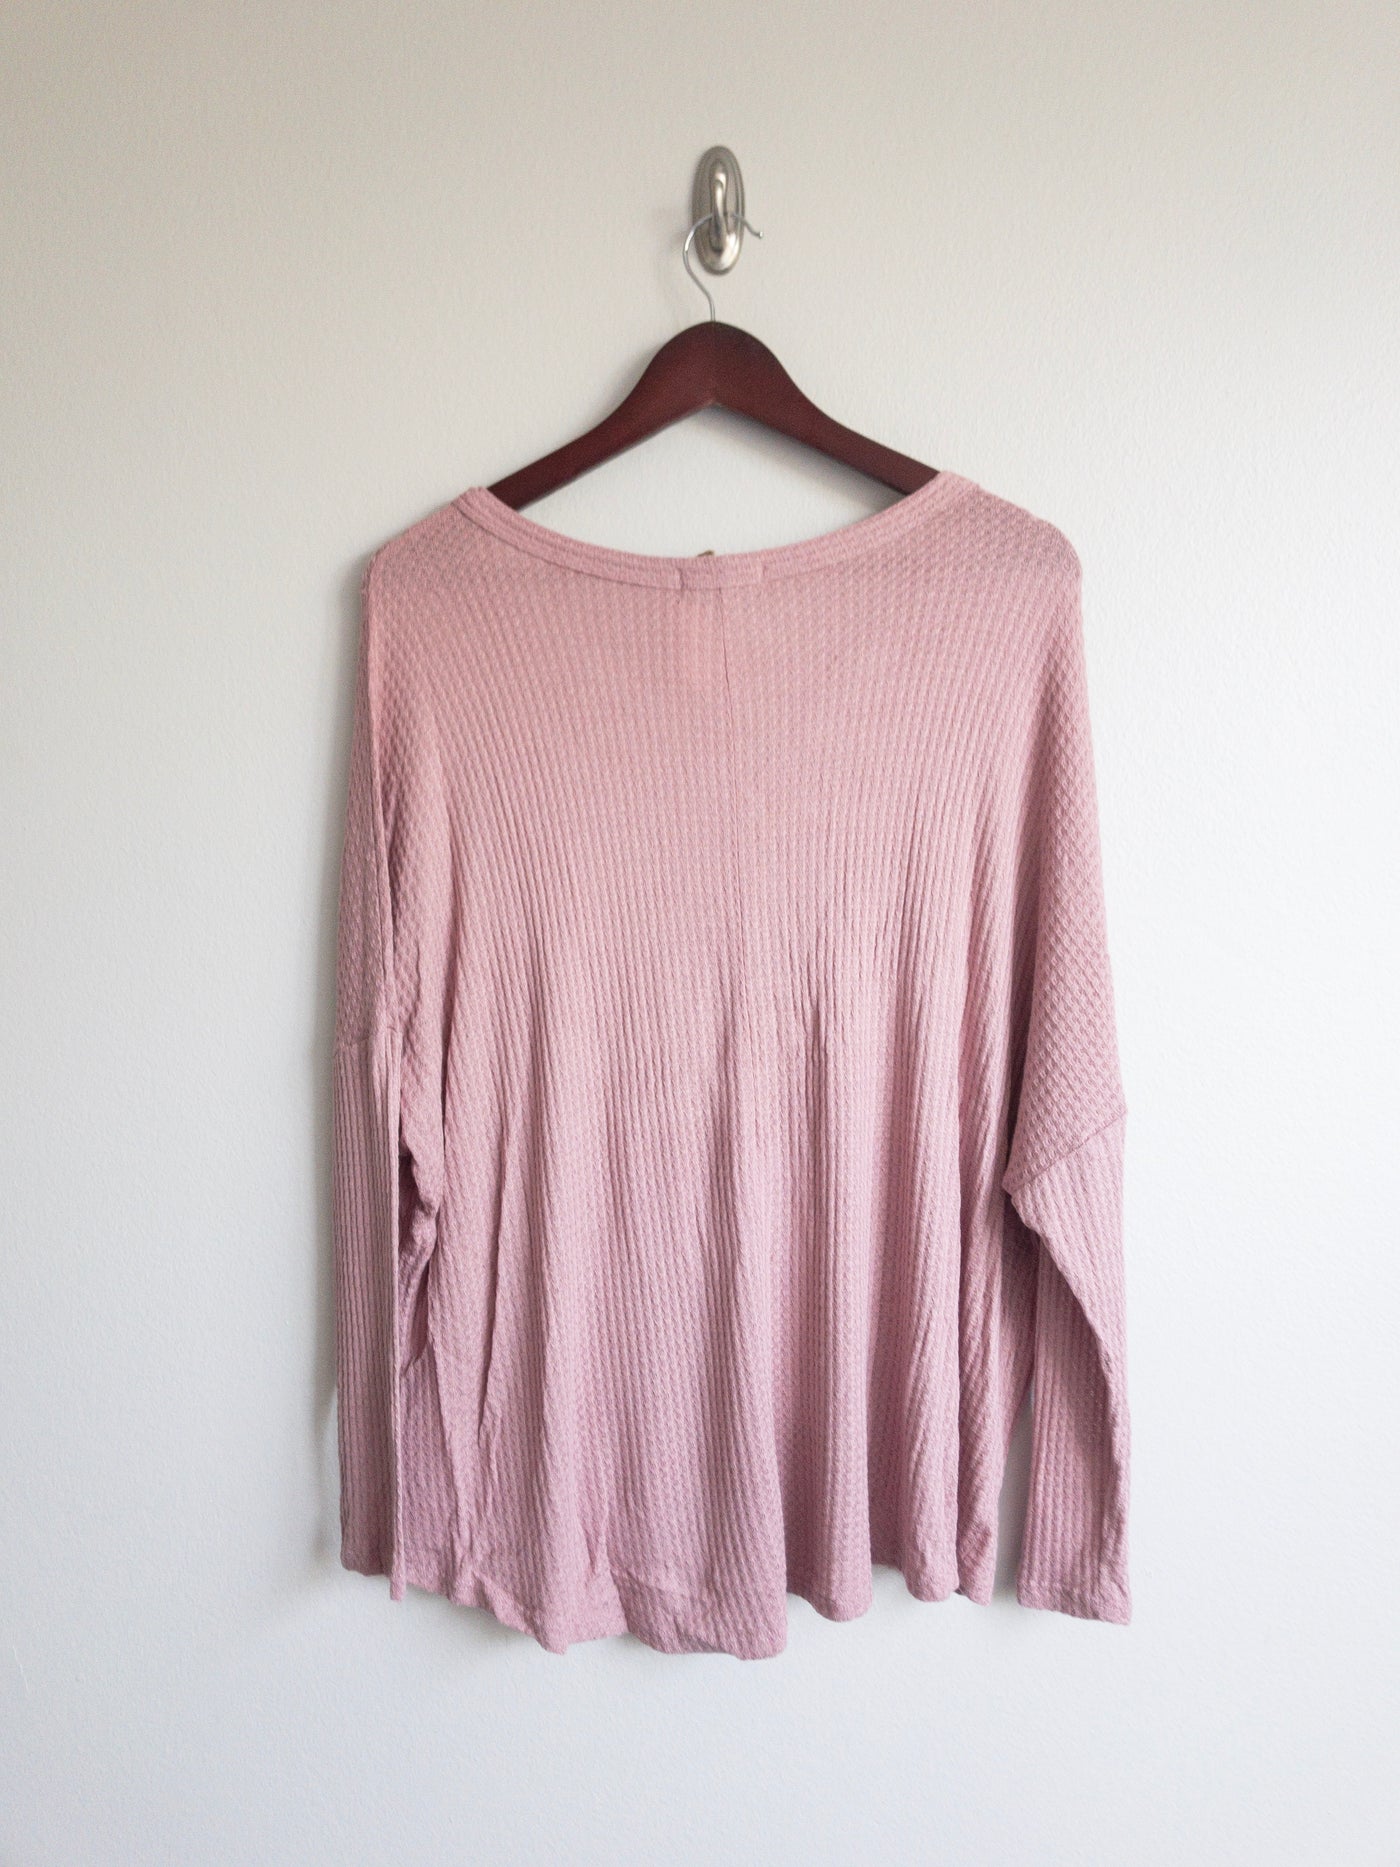 Courtney Waffle Knit Top - Corinne an Affordable Women's Clothing Boutique in the US USA